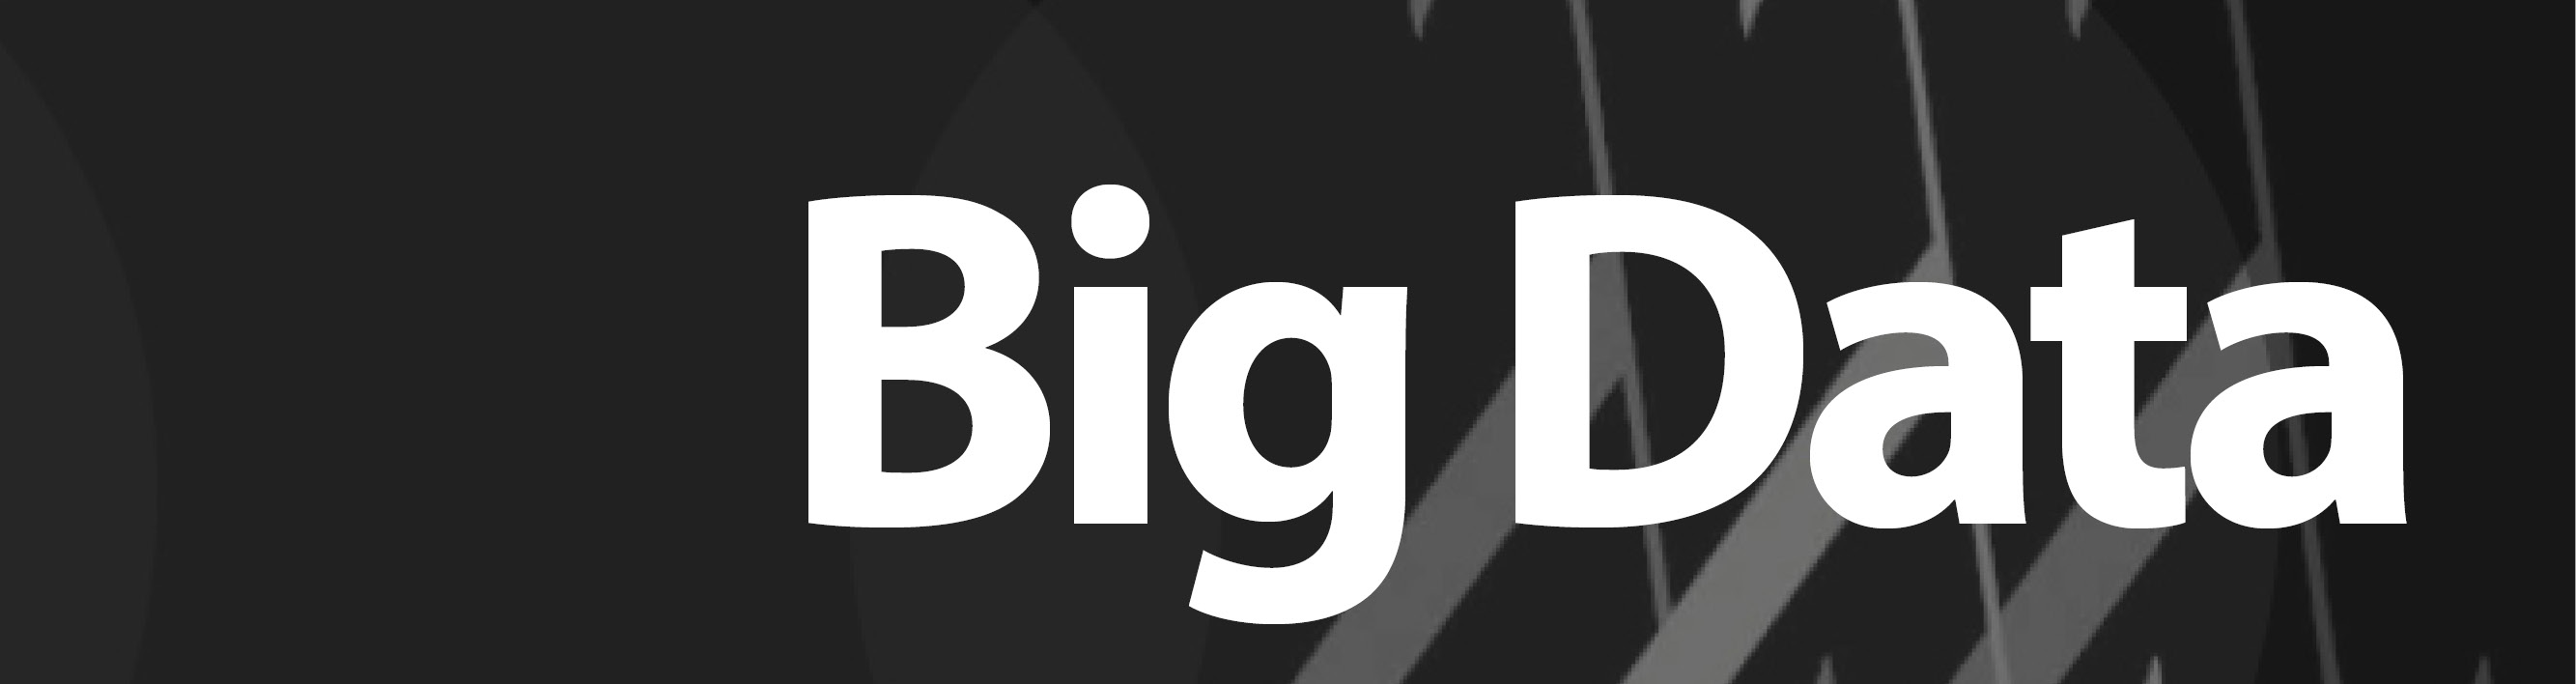 Big Data special collection